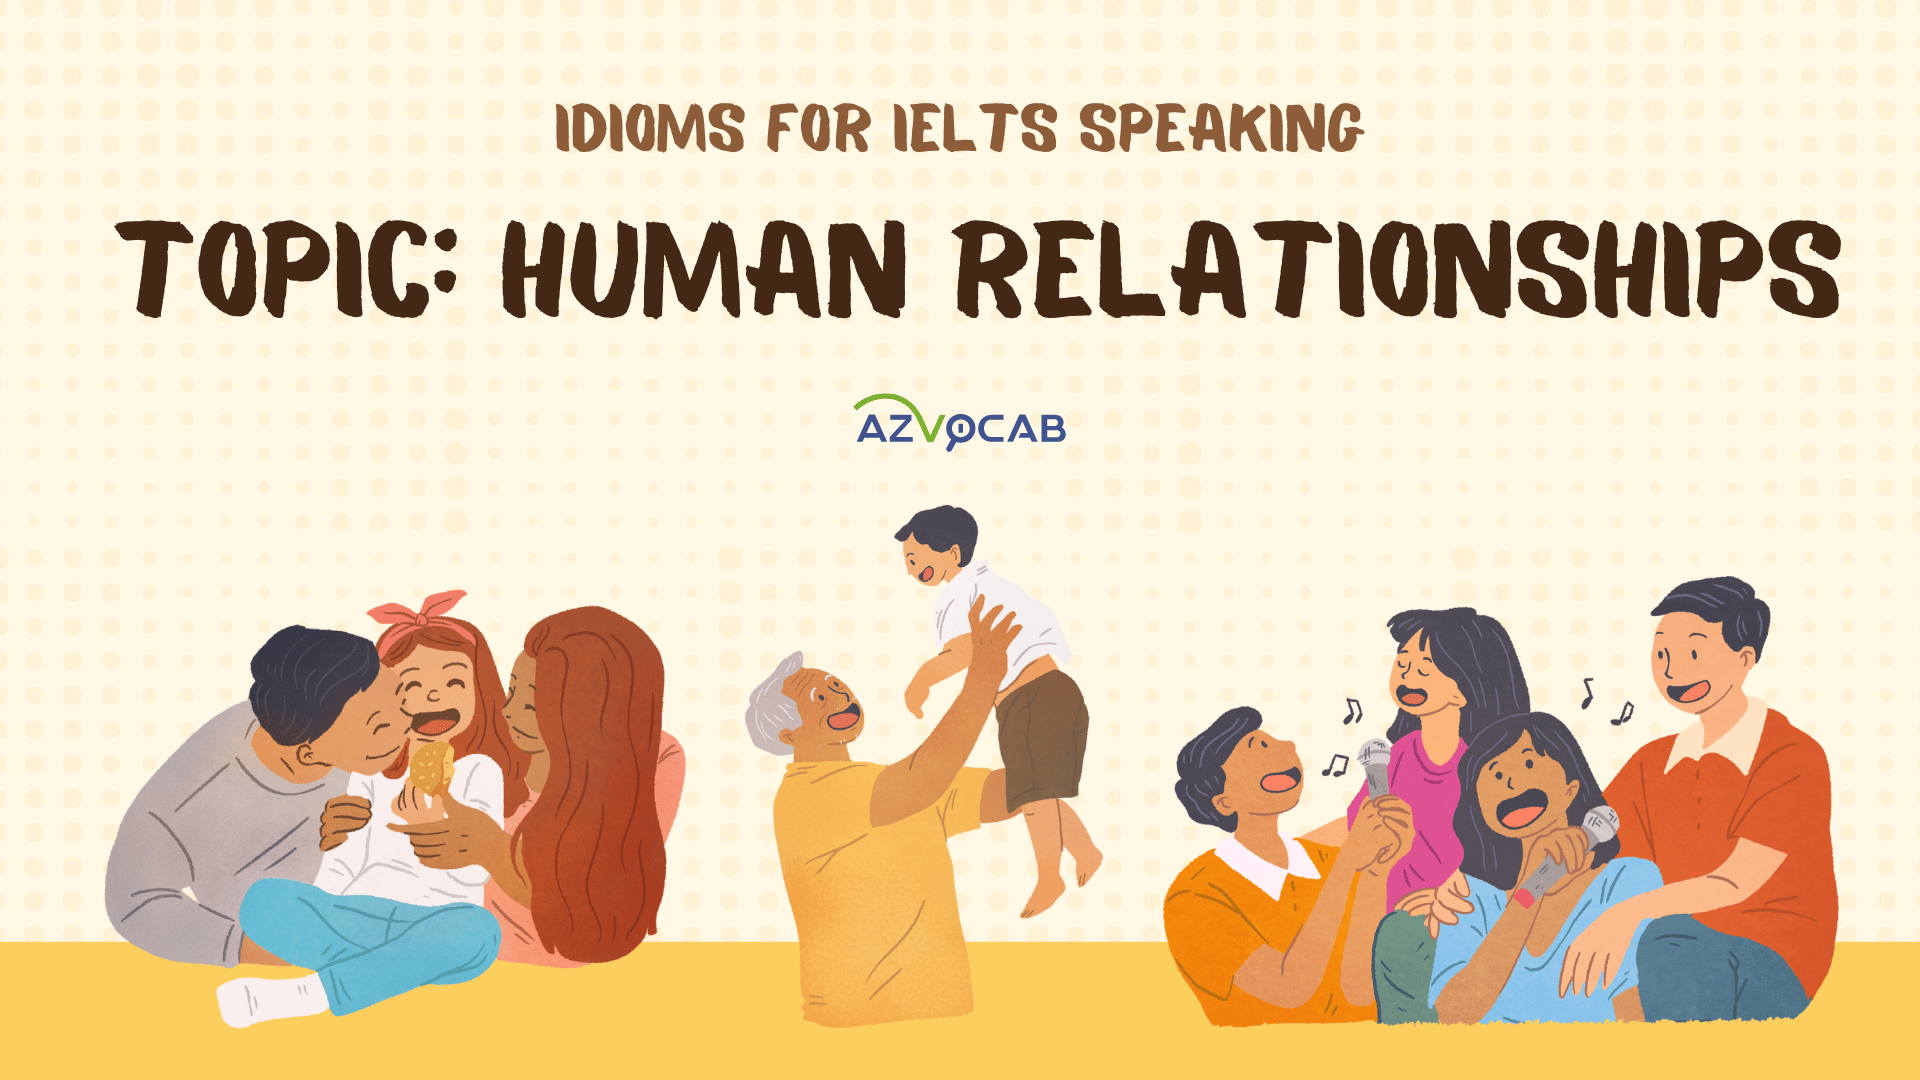 Idioms for IELTS Speaking Human relationships